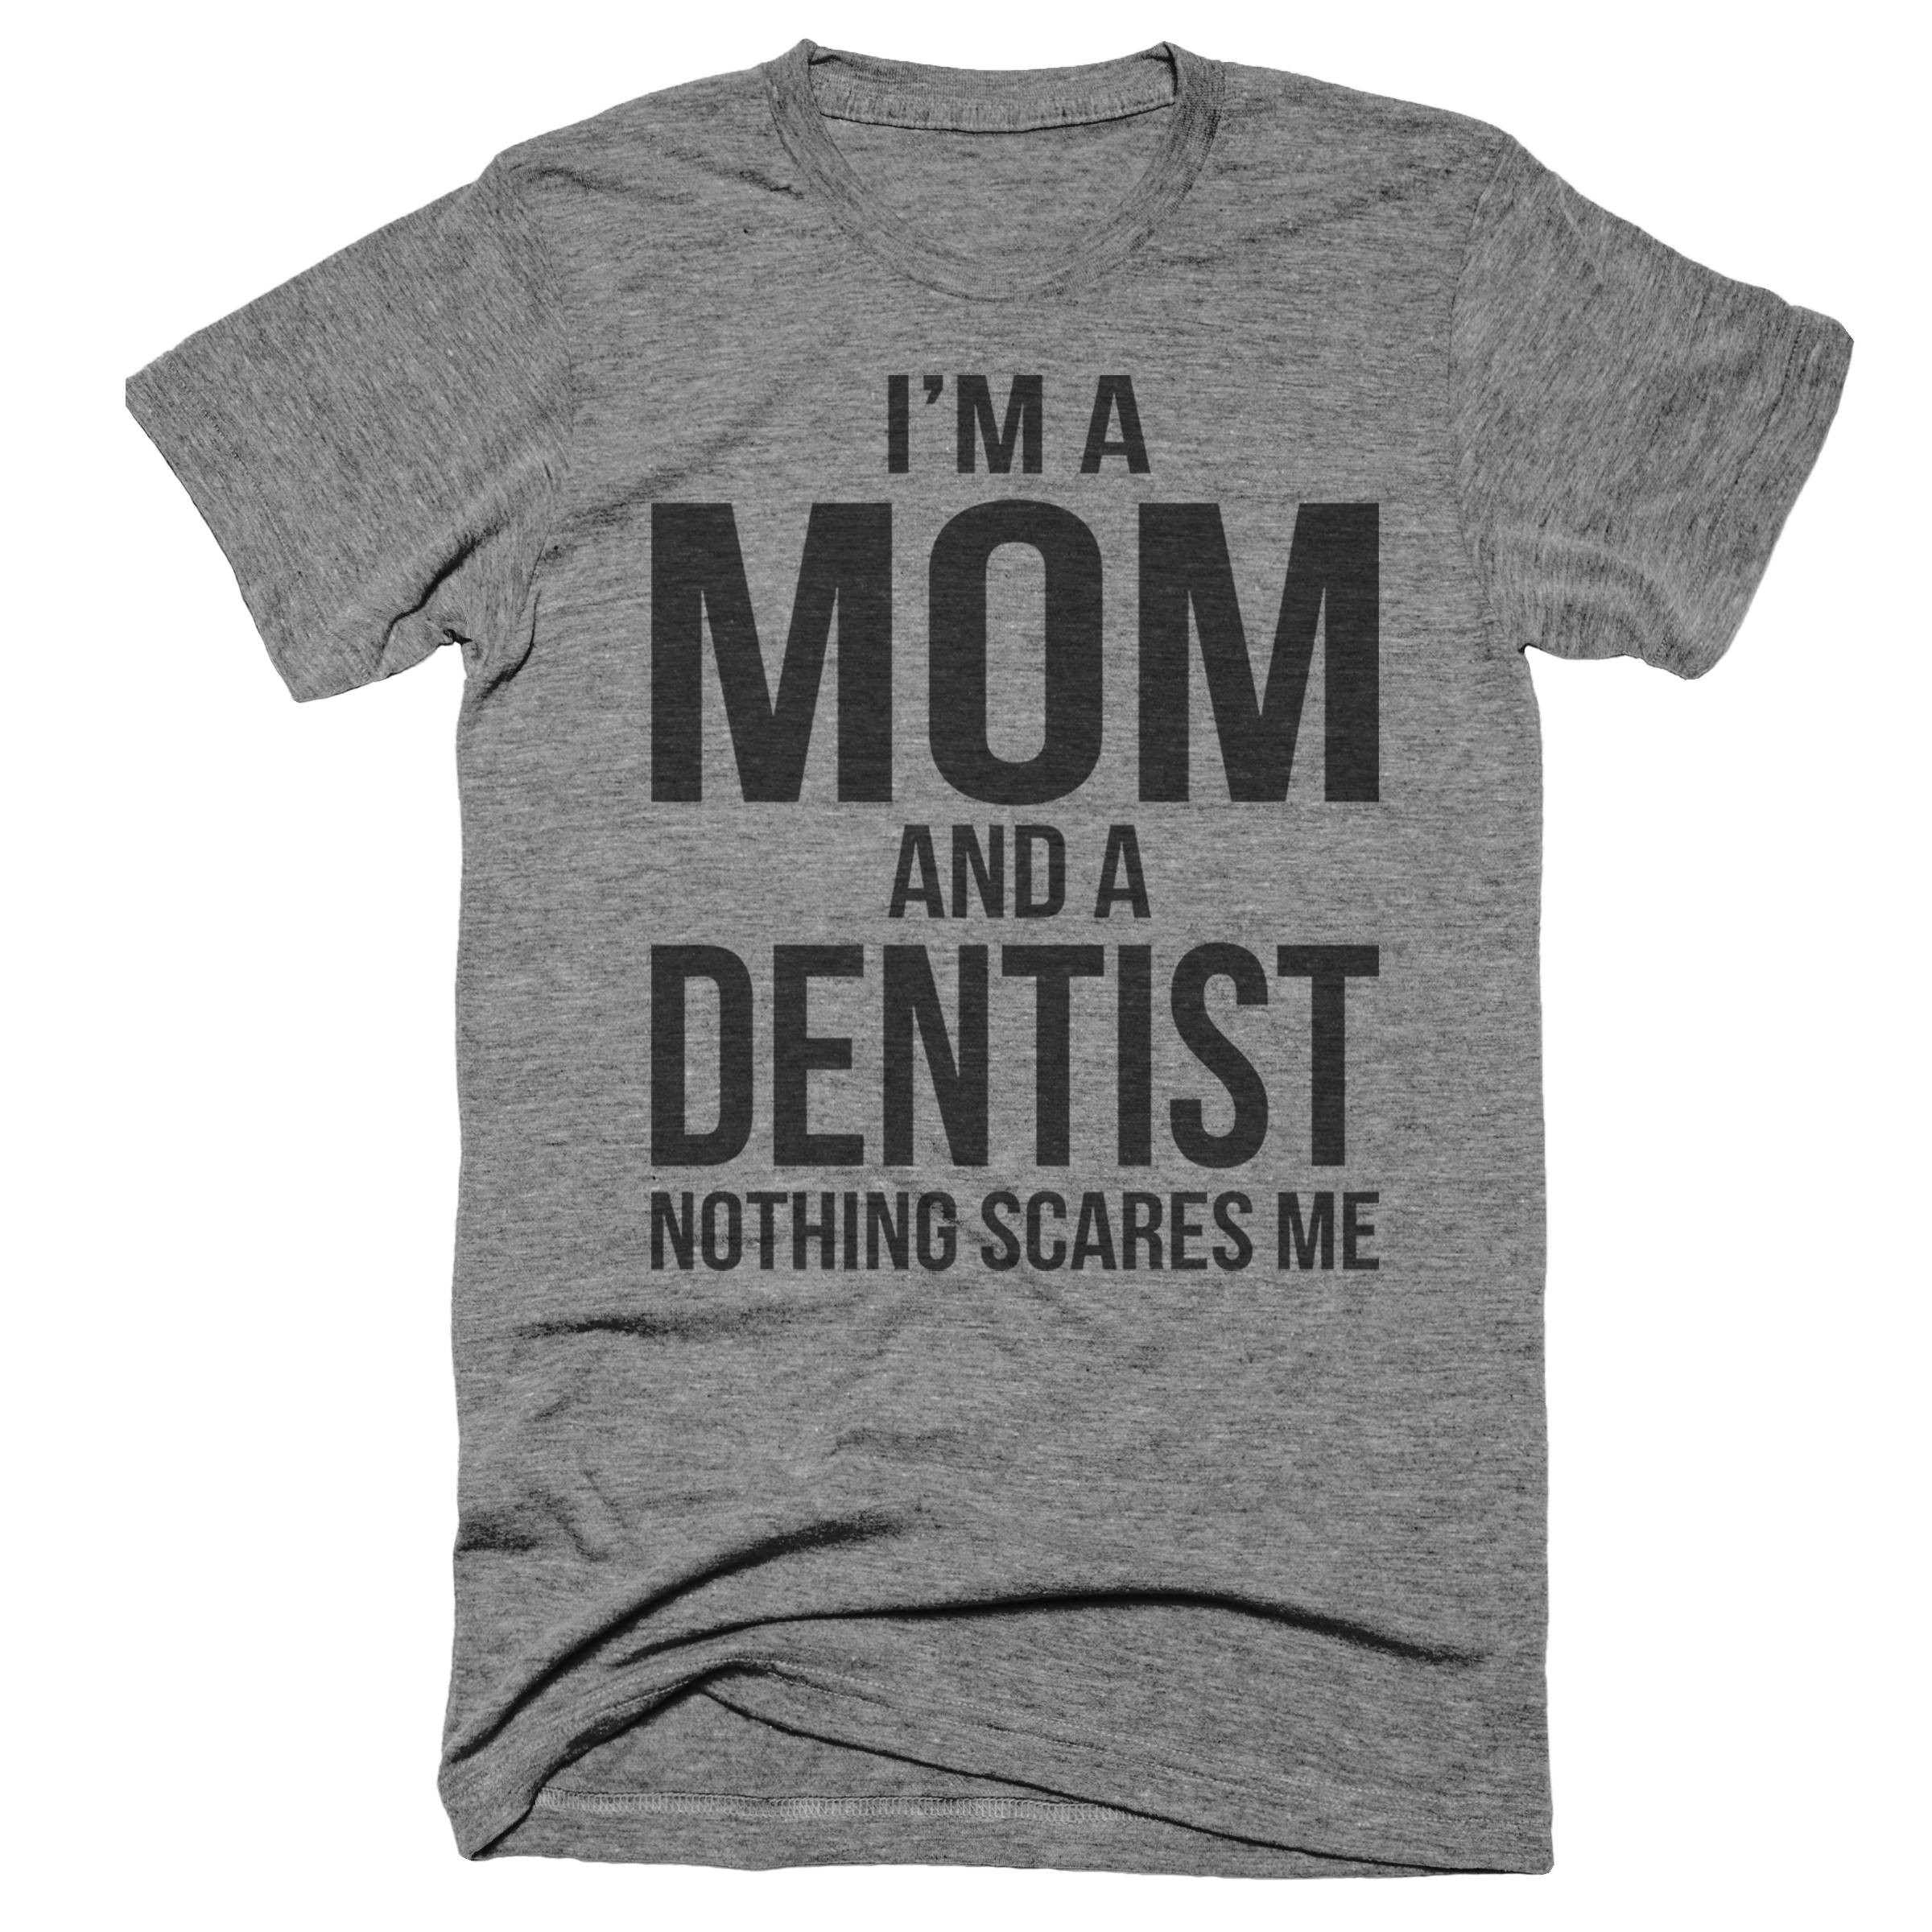 Dental School Graduation Gift Ideas
 Mom And A Dentist Gift Gift For Mother Funny Dentist